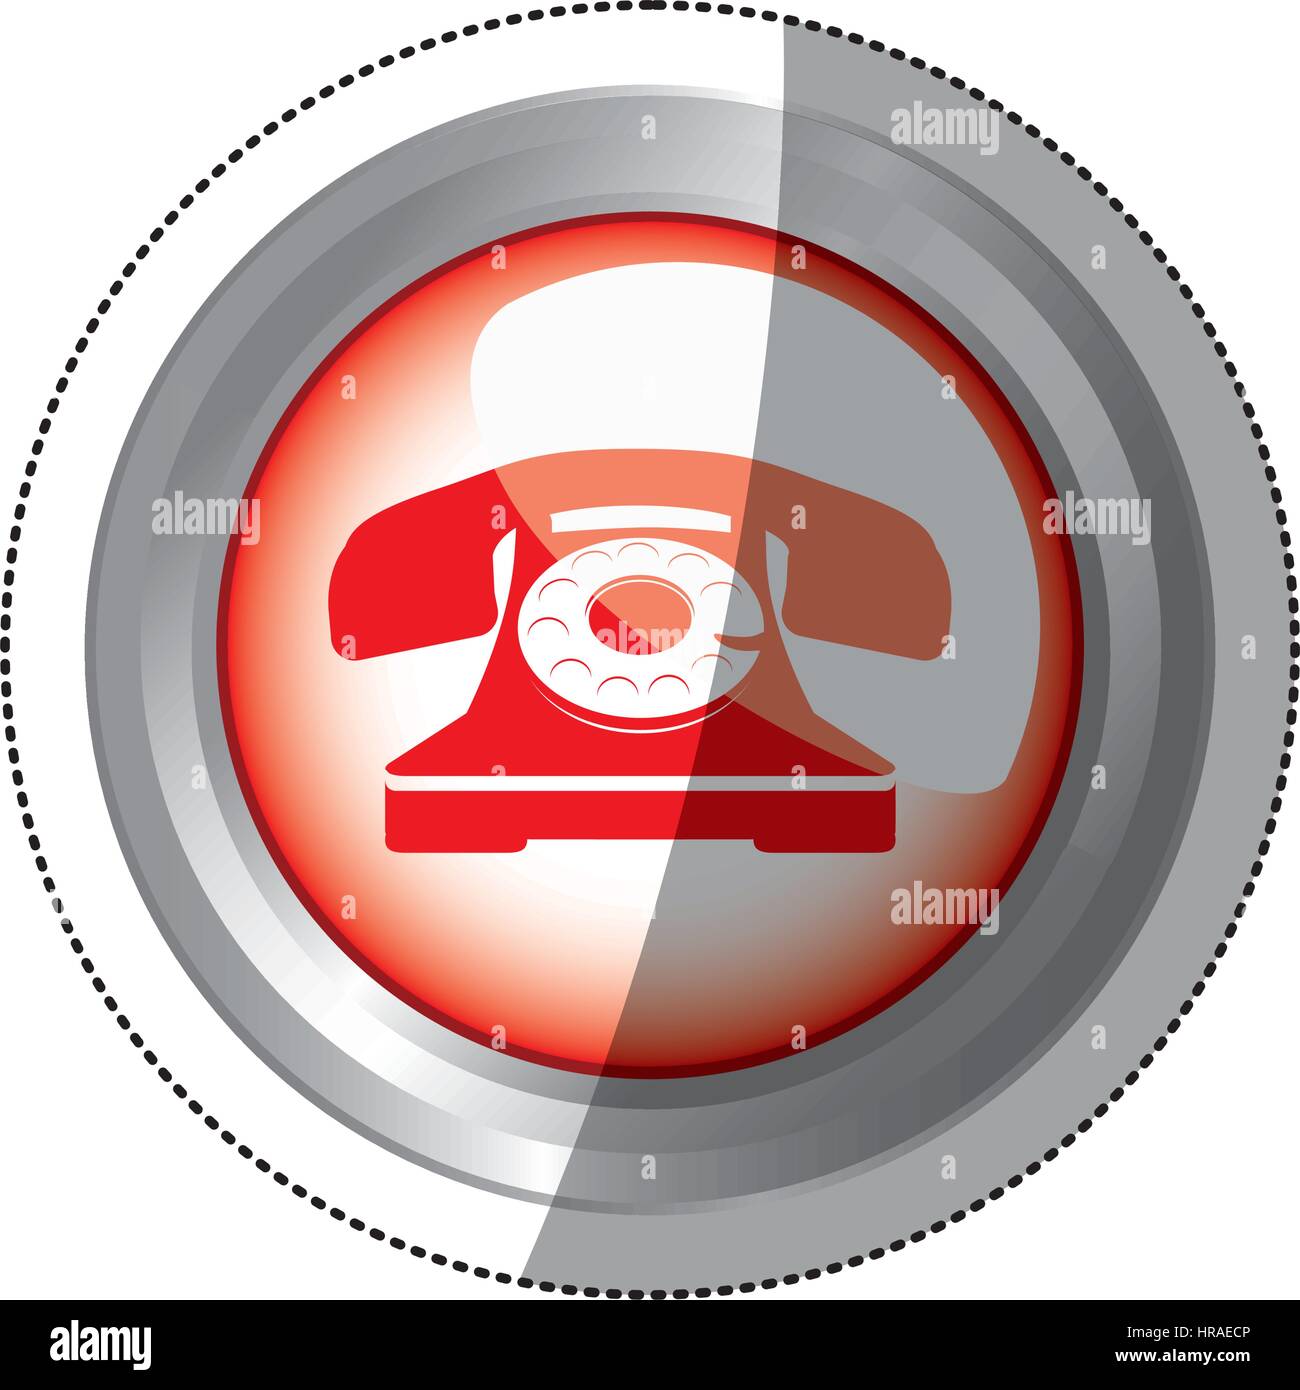 sticker circular button red old phone icon Stock Vector